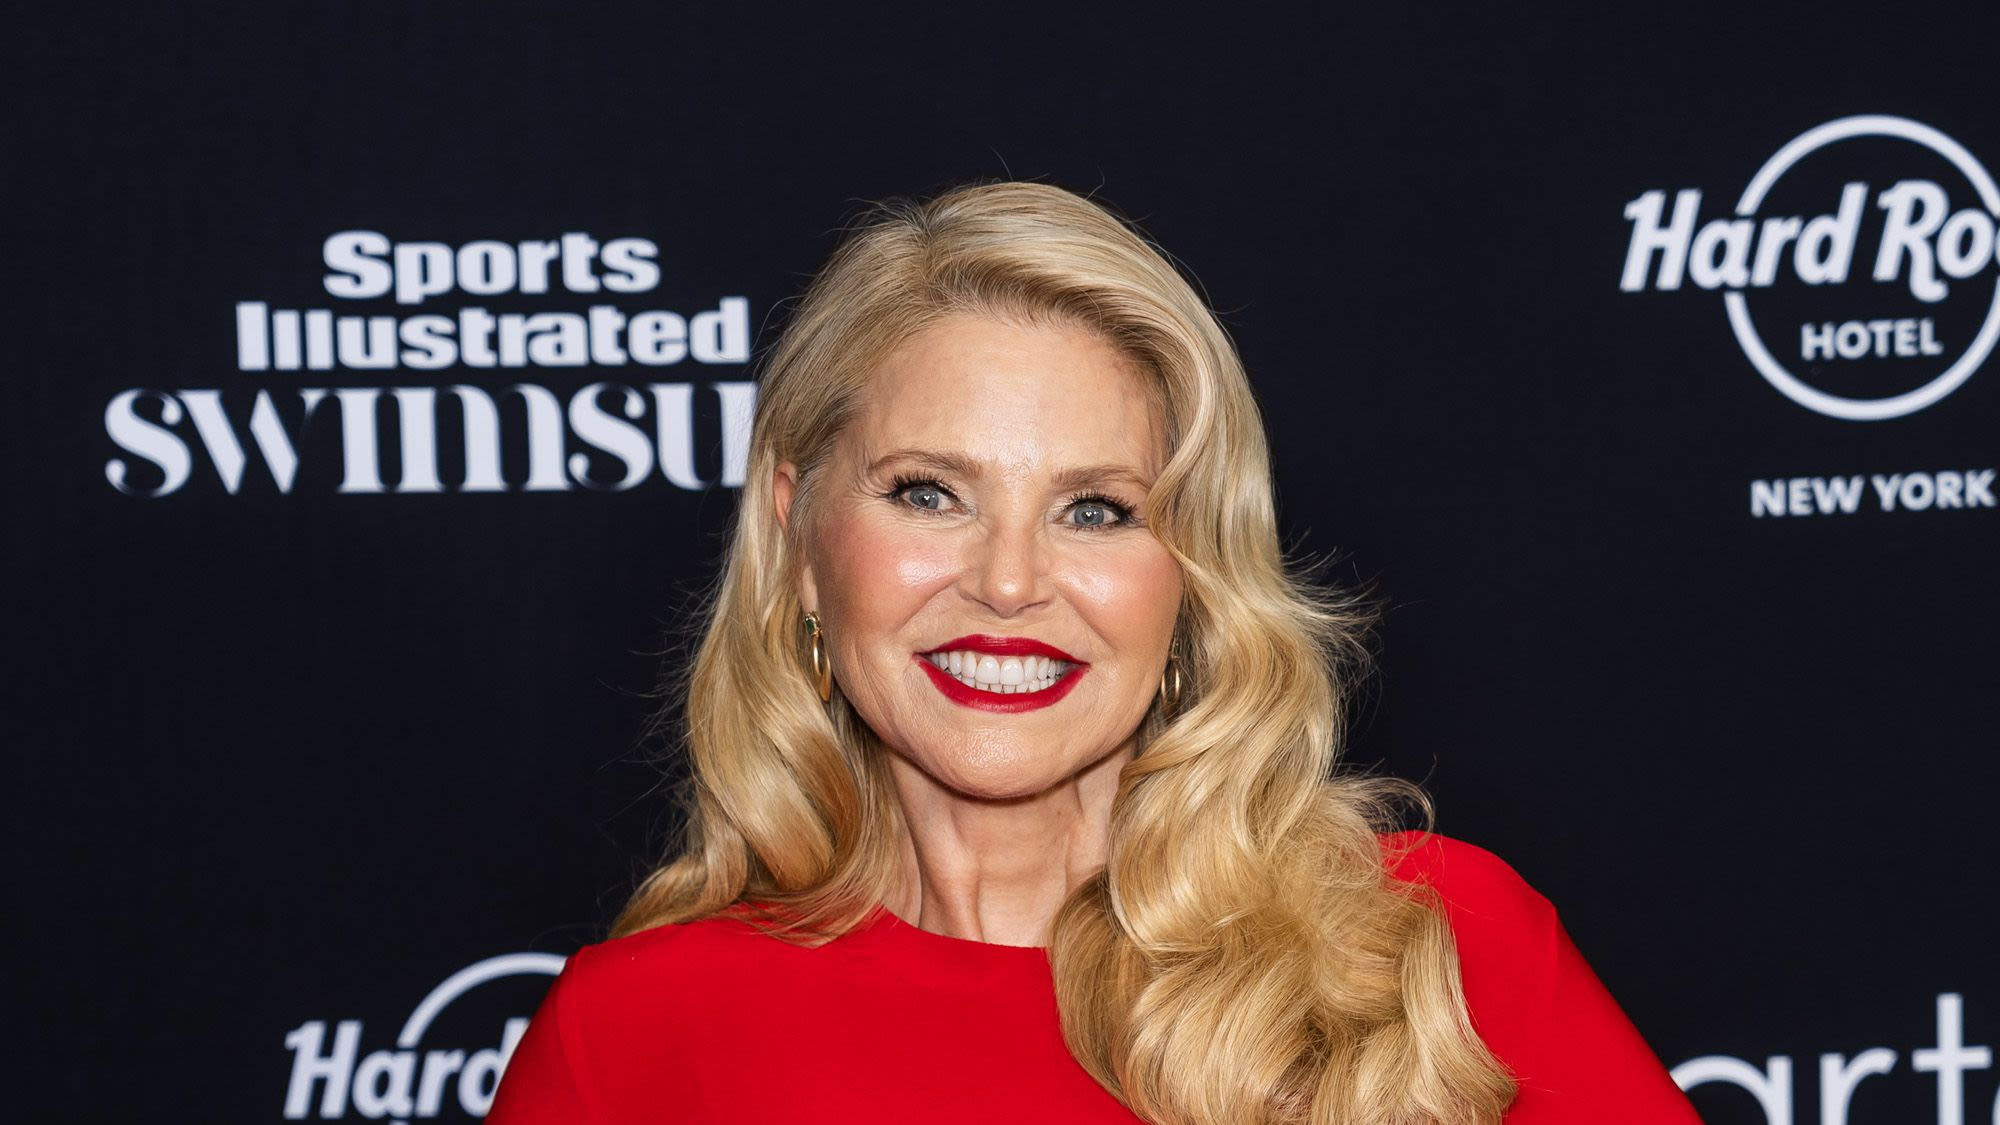 Christie Brinkley Talks Getting ‘Older’ and Posing for ‘Sports Illustrated’ at 70